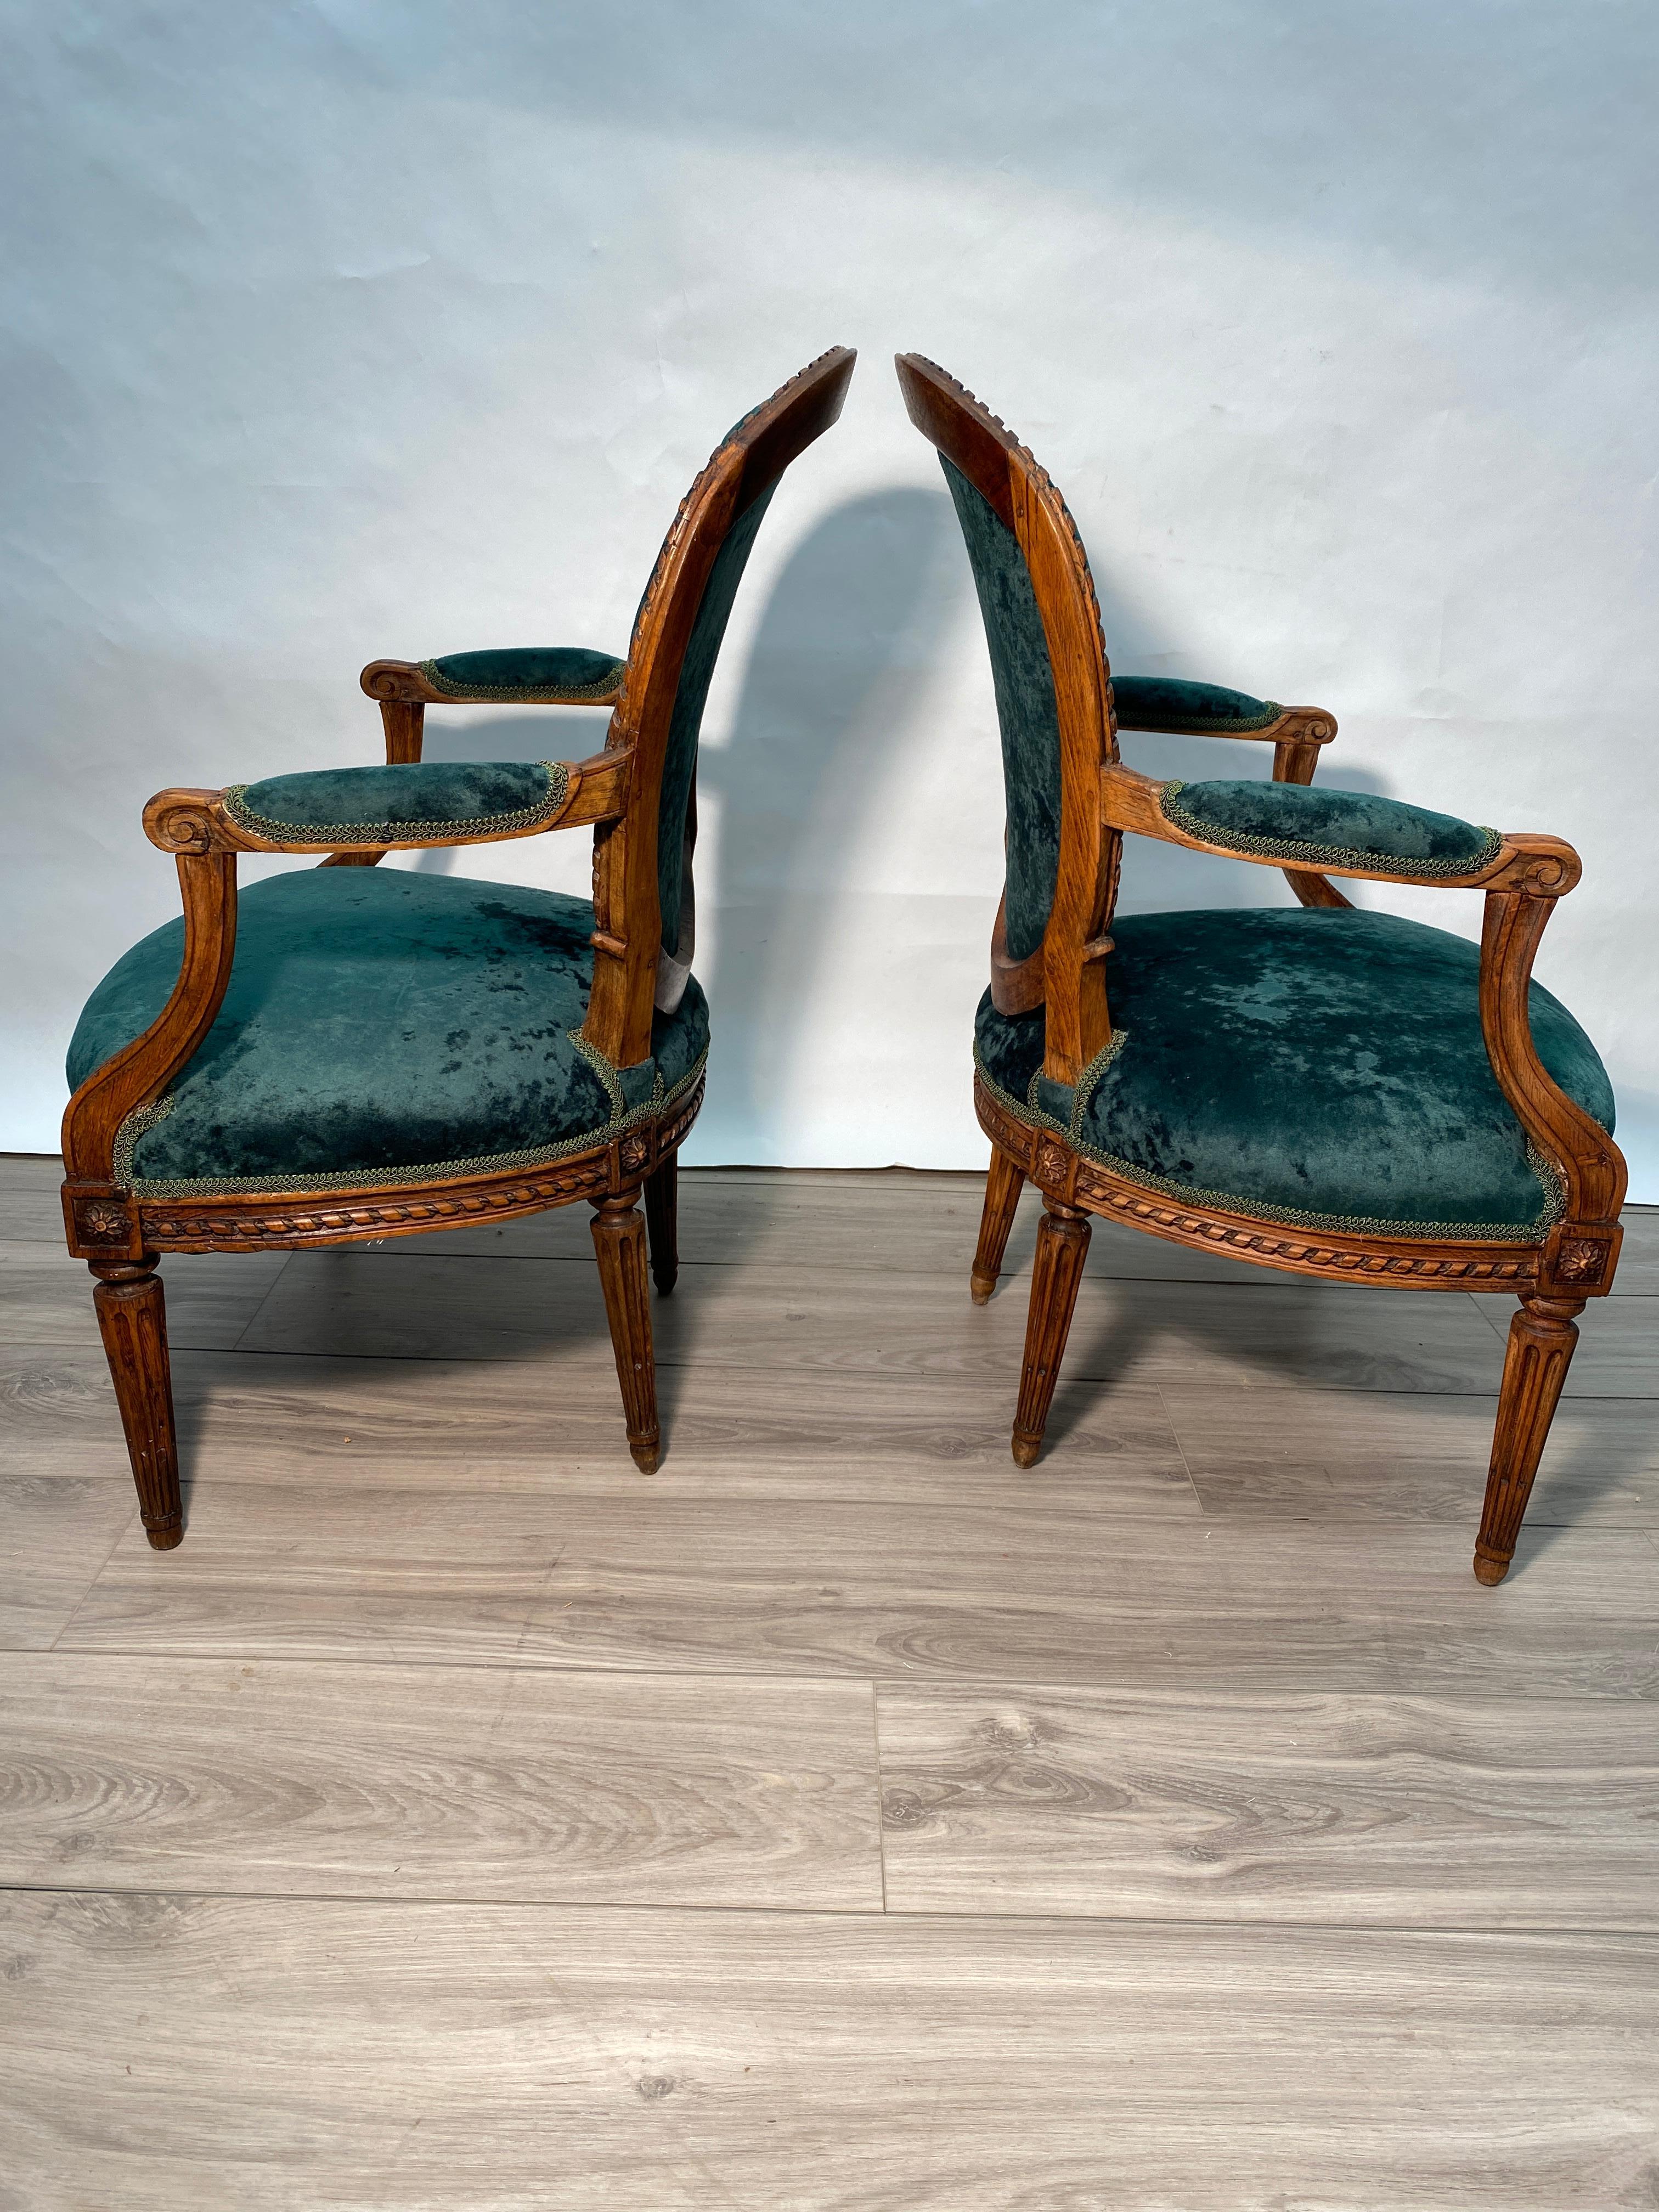 Pair of Period 18th Century French Louis XVI Walnut Fauteuil Arm Chairs For Sale 2